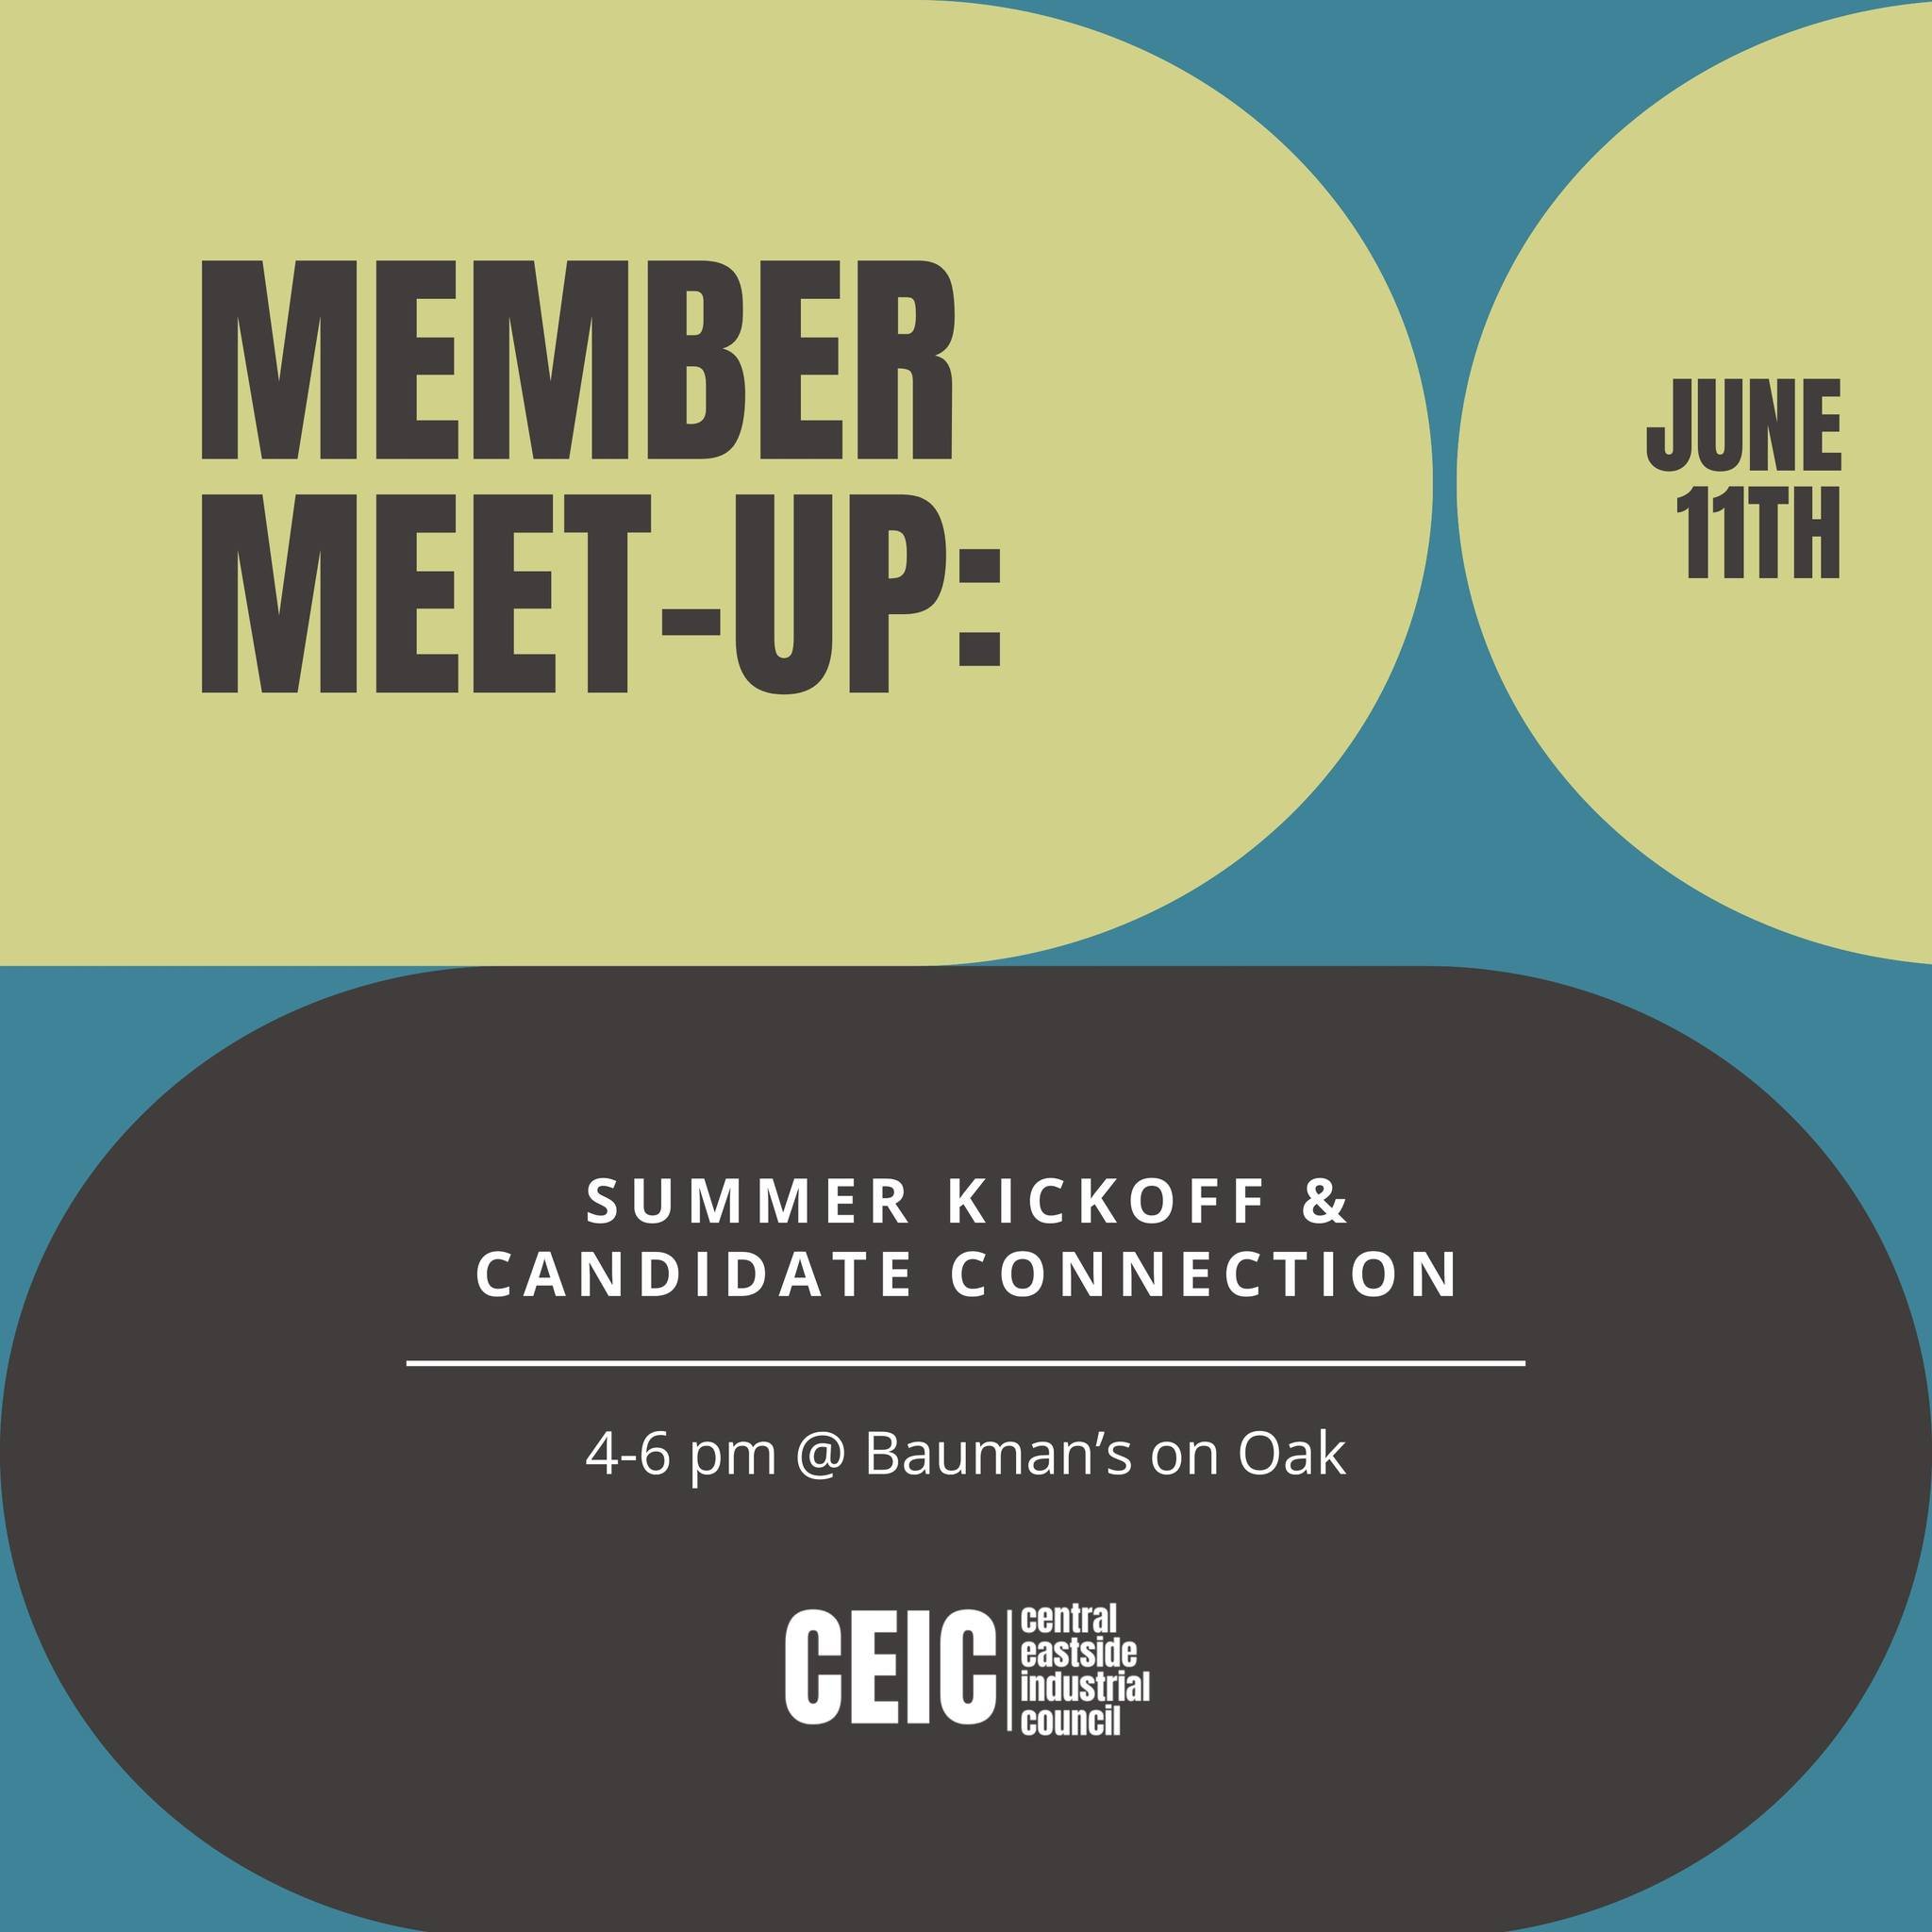 We're thrilled to welcome the recently opened @baumansonoak to the Central Eastside and invite CEIC members and non-members alike to an exclusive networking event at the restaurant on June 11th from 4-6 pm. This is your chance to connect face-to-face